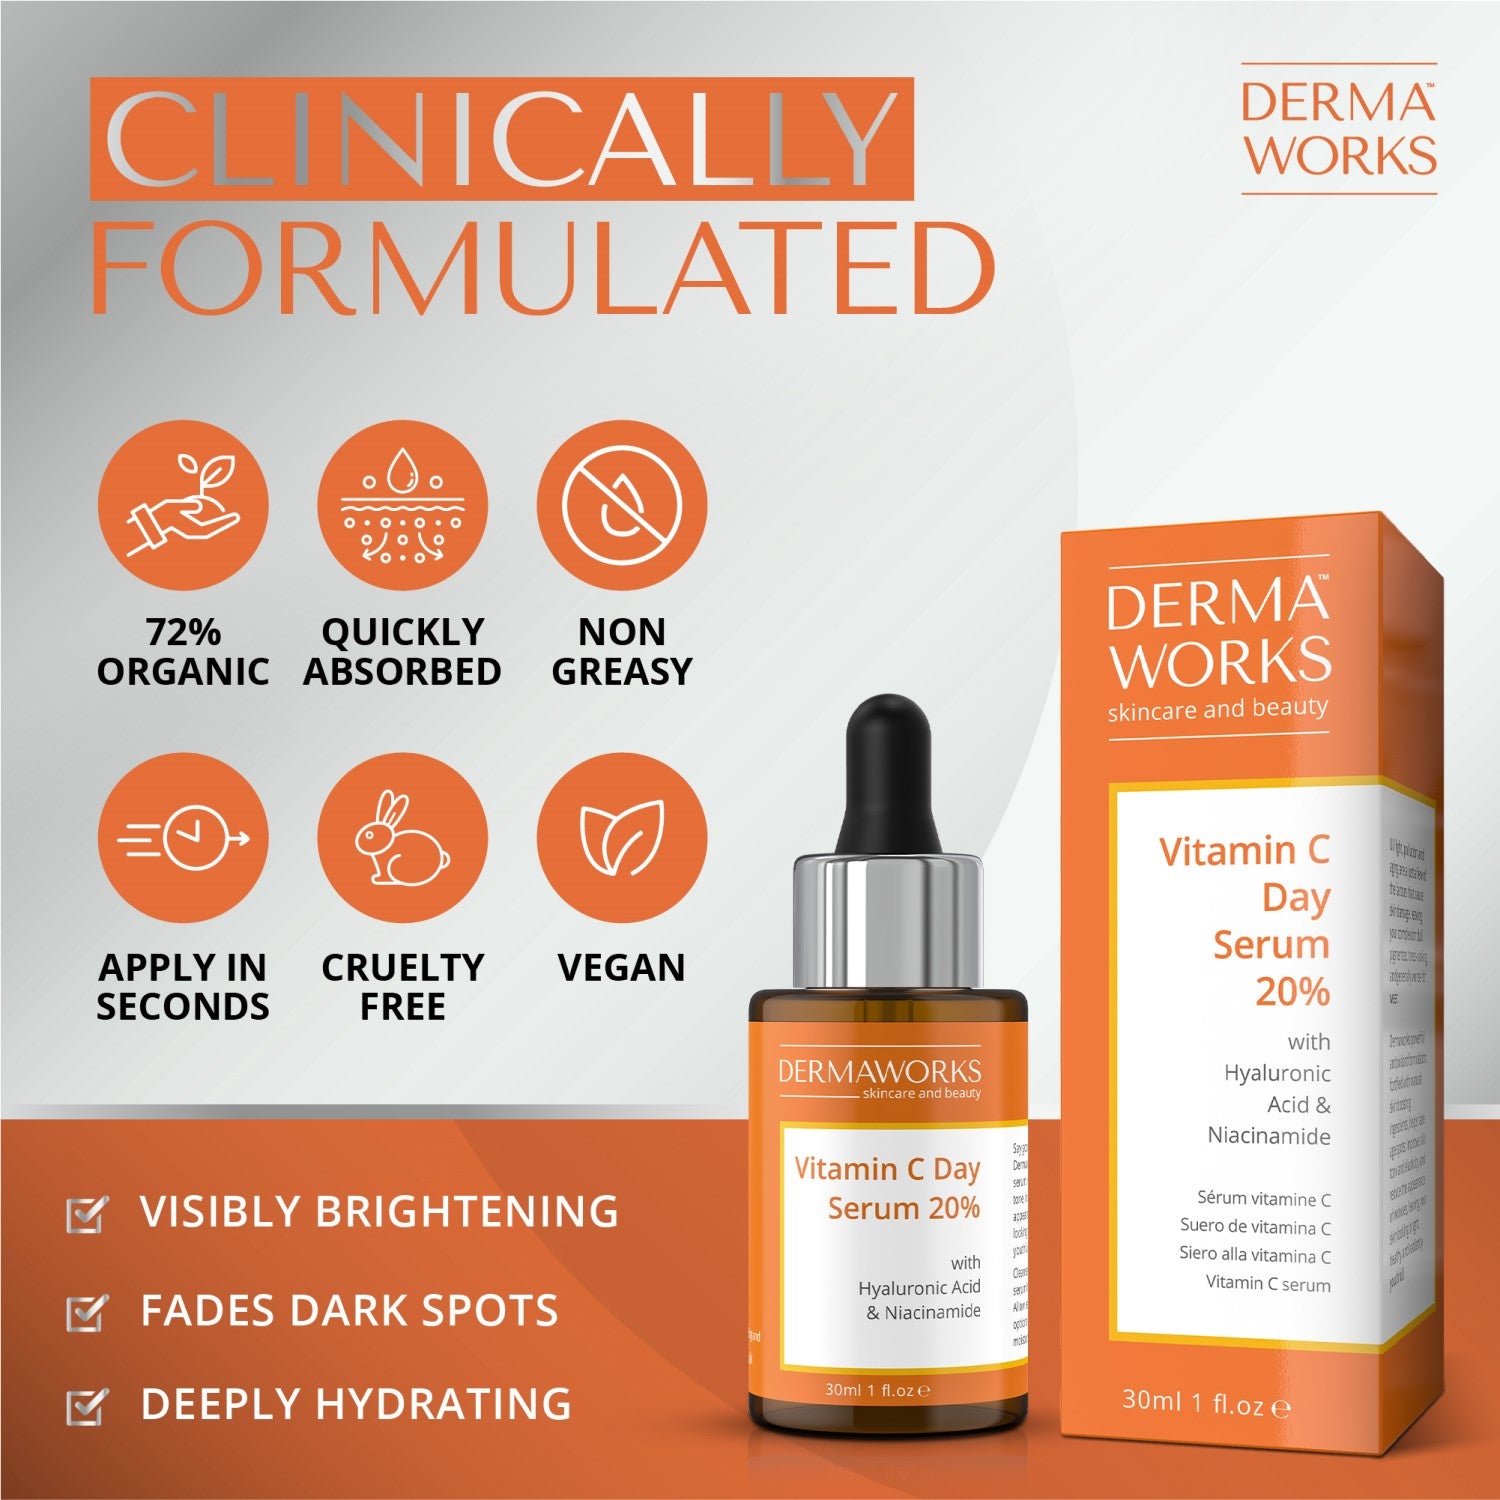 Dermaworks anti aging vitamin C serum for face and eyes is visibly brightening, helps fade dark spots and is deeply hydrating.